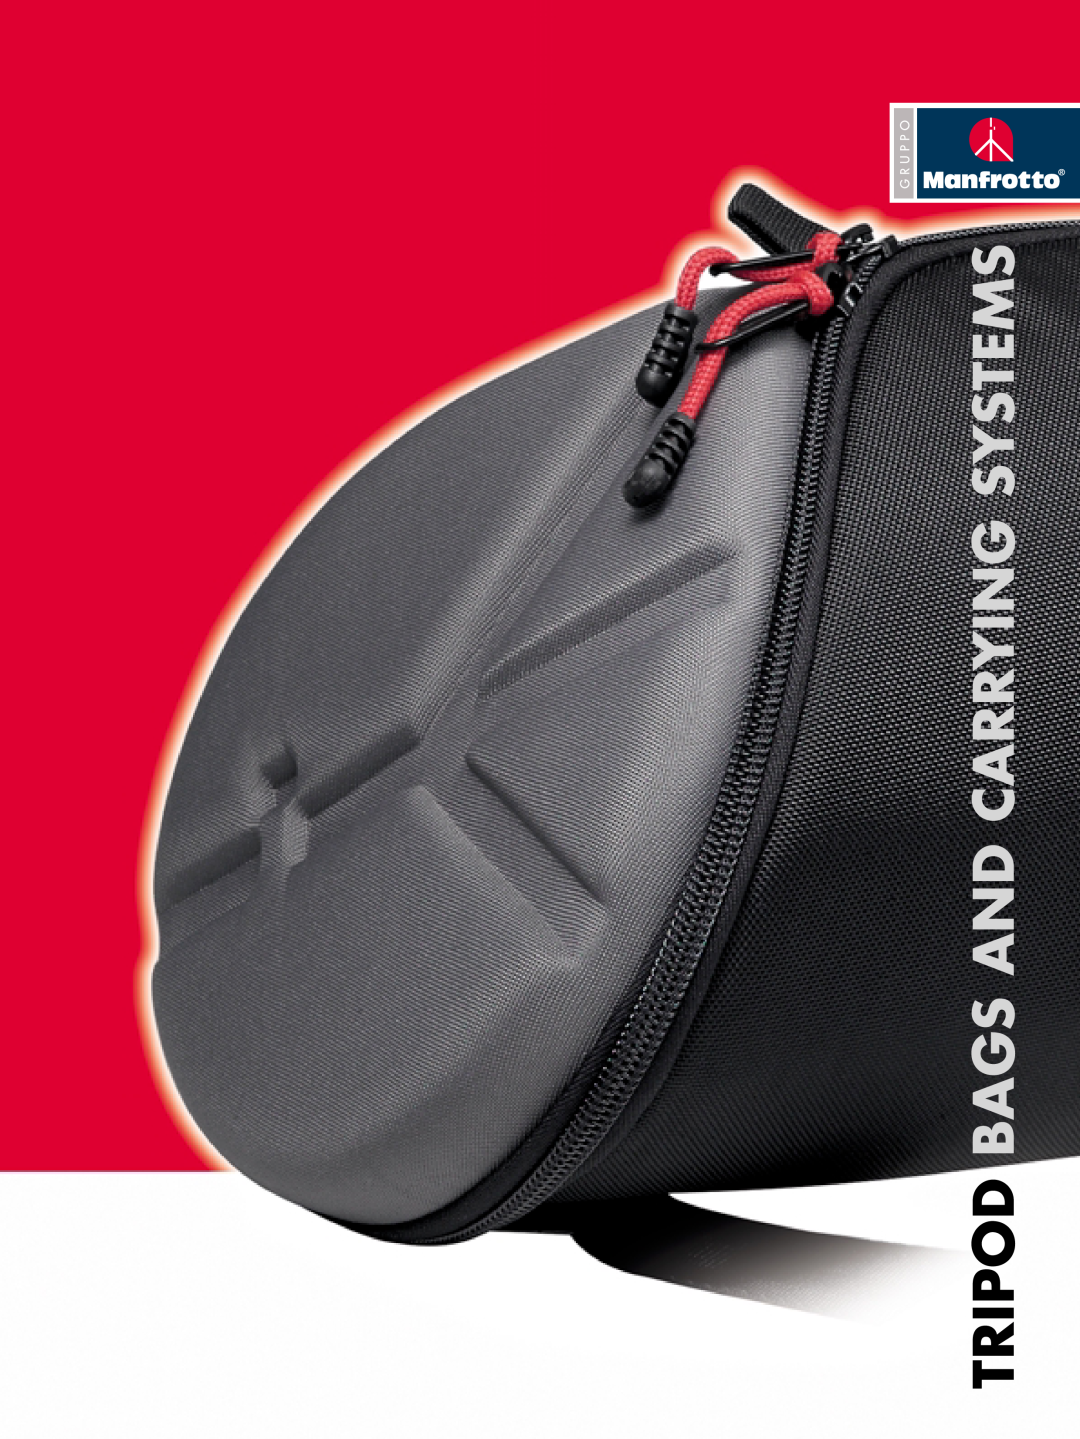 Manfrotto MBAG70, MBAGD, MBAG120P, MBAG90P, MBAG100P, MBAG80P manual Tripod Bags And Carrying Systems 